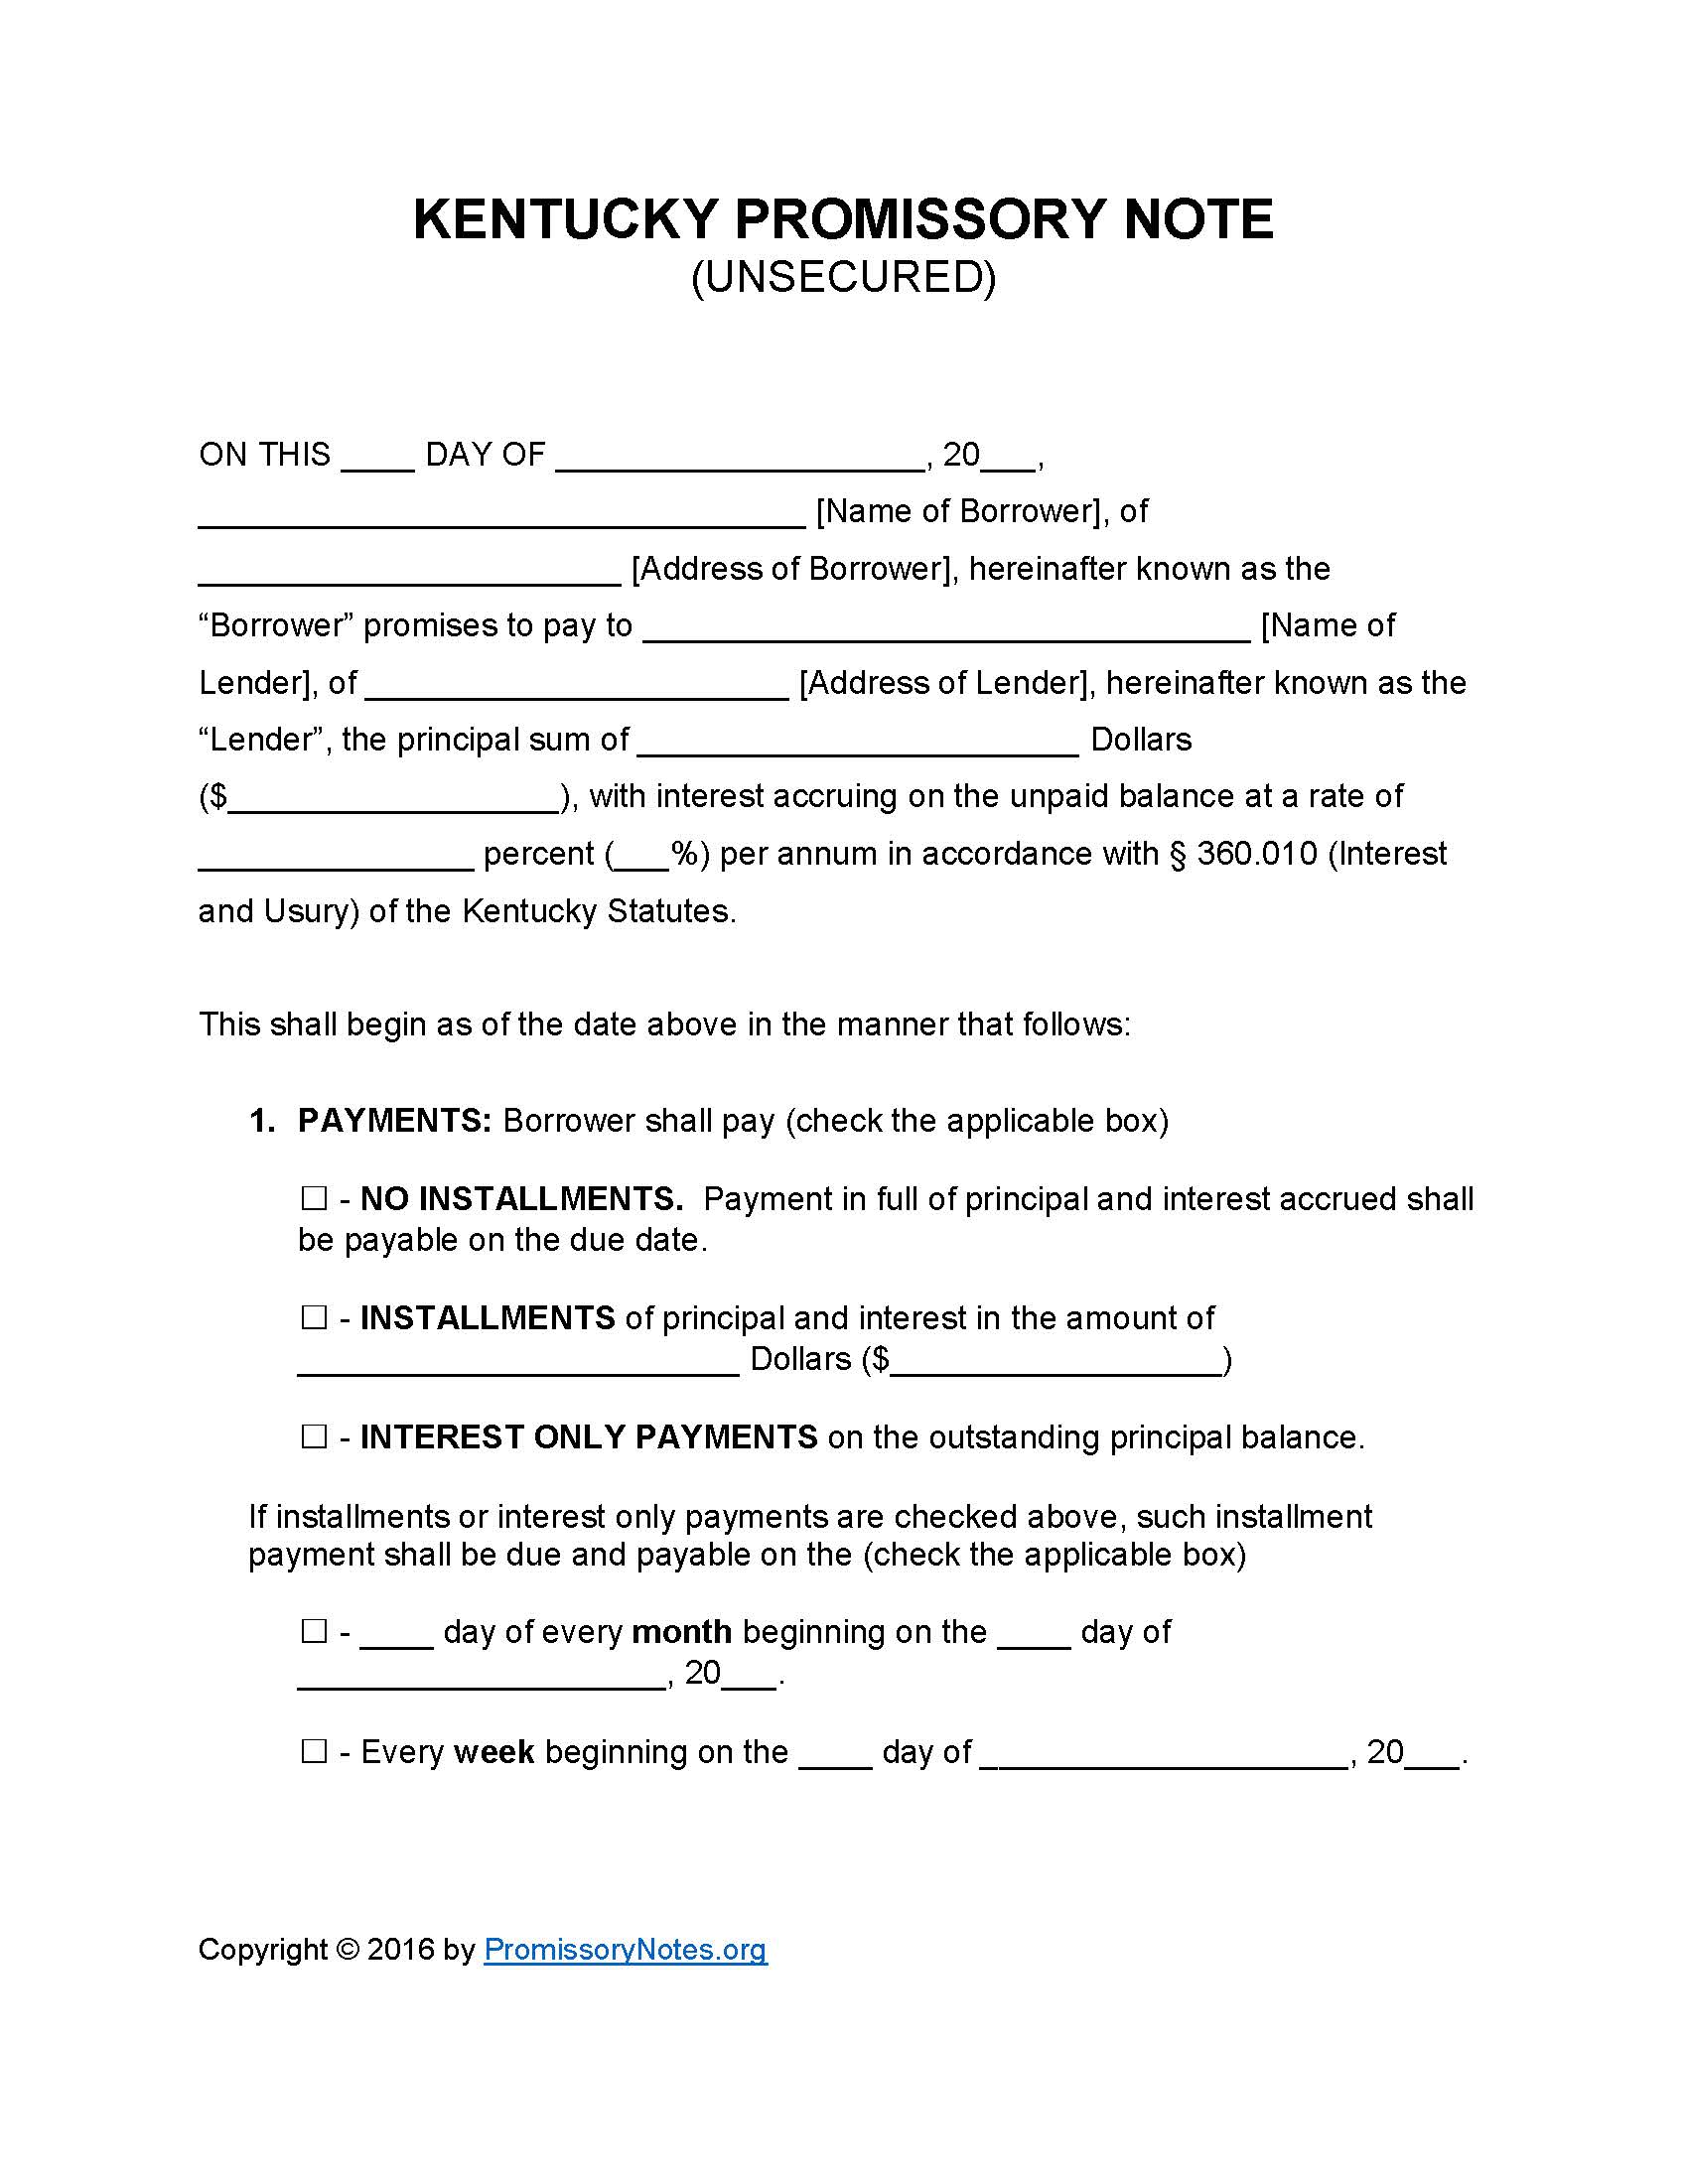 kentucky-unsecured-promissory-note-form